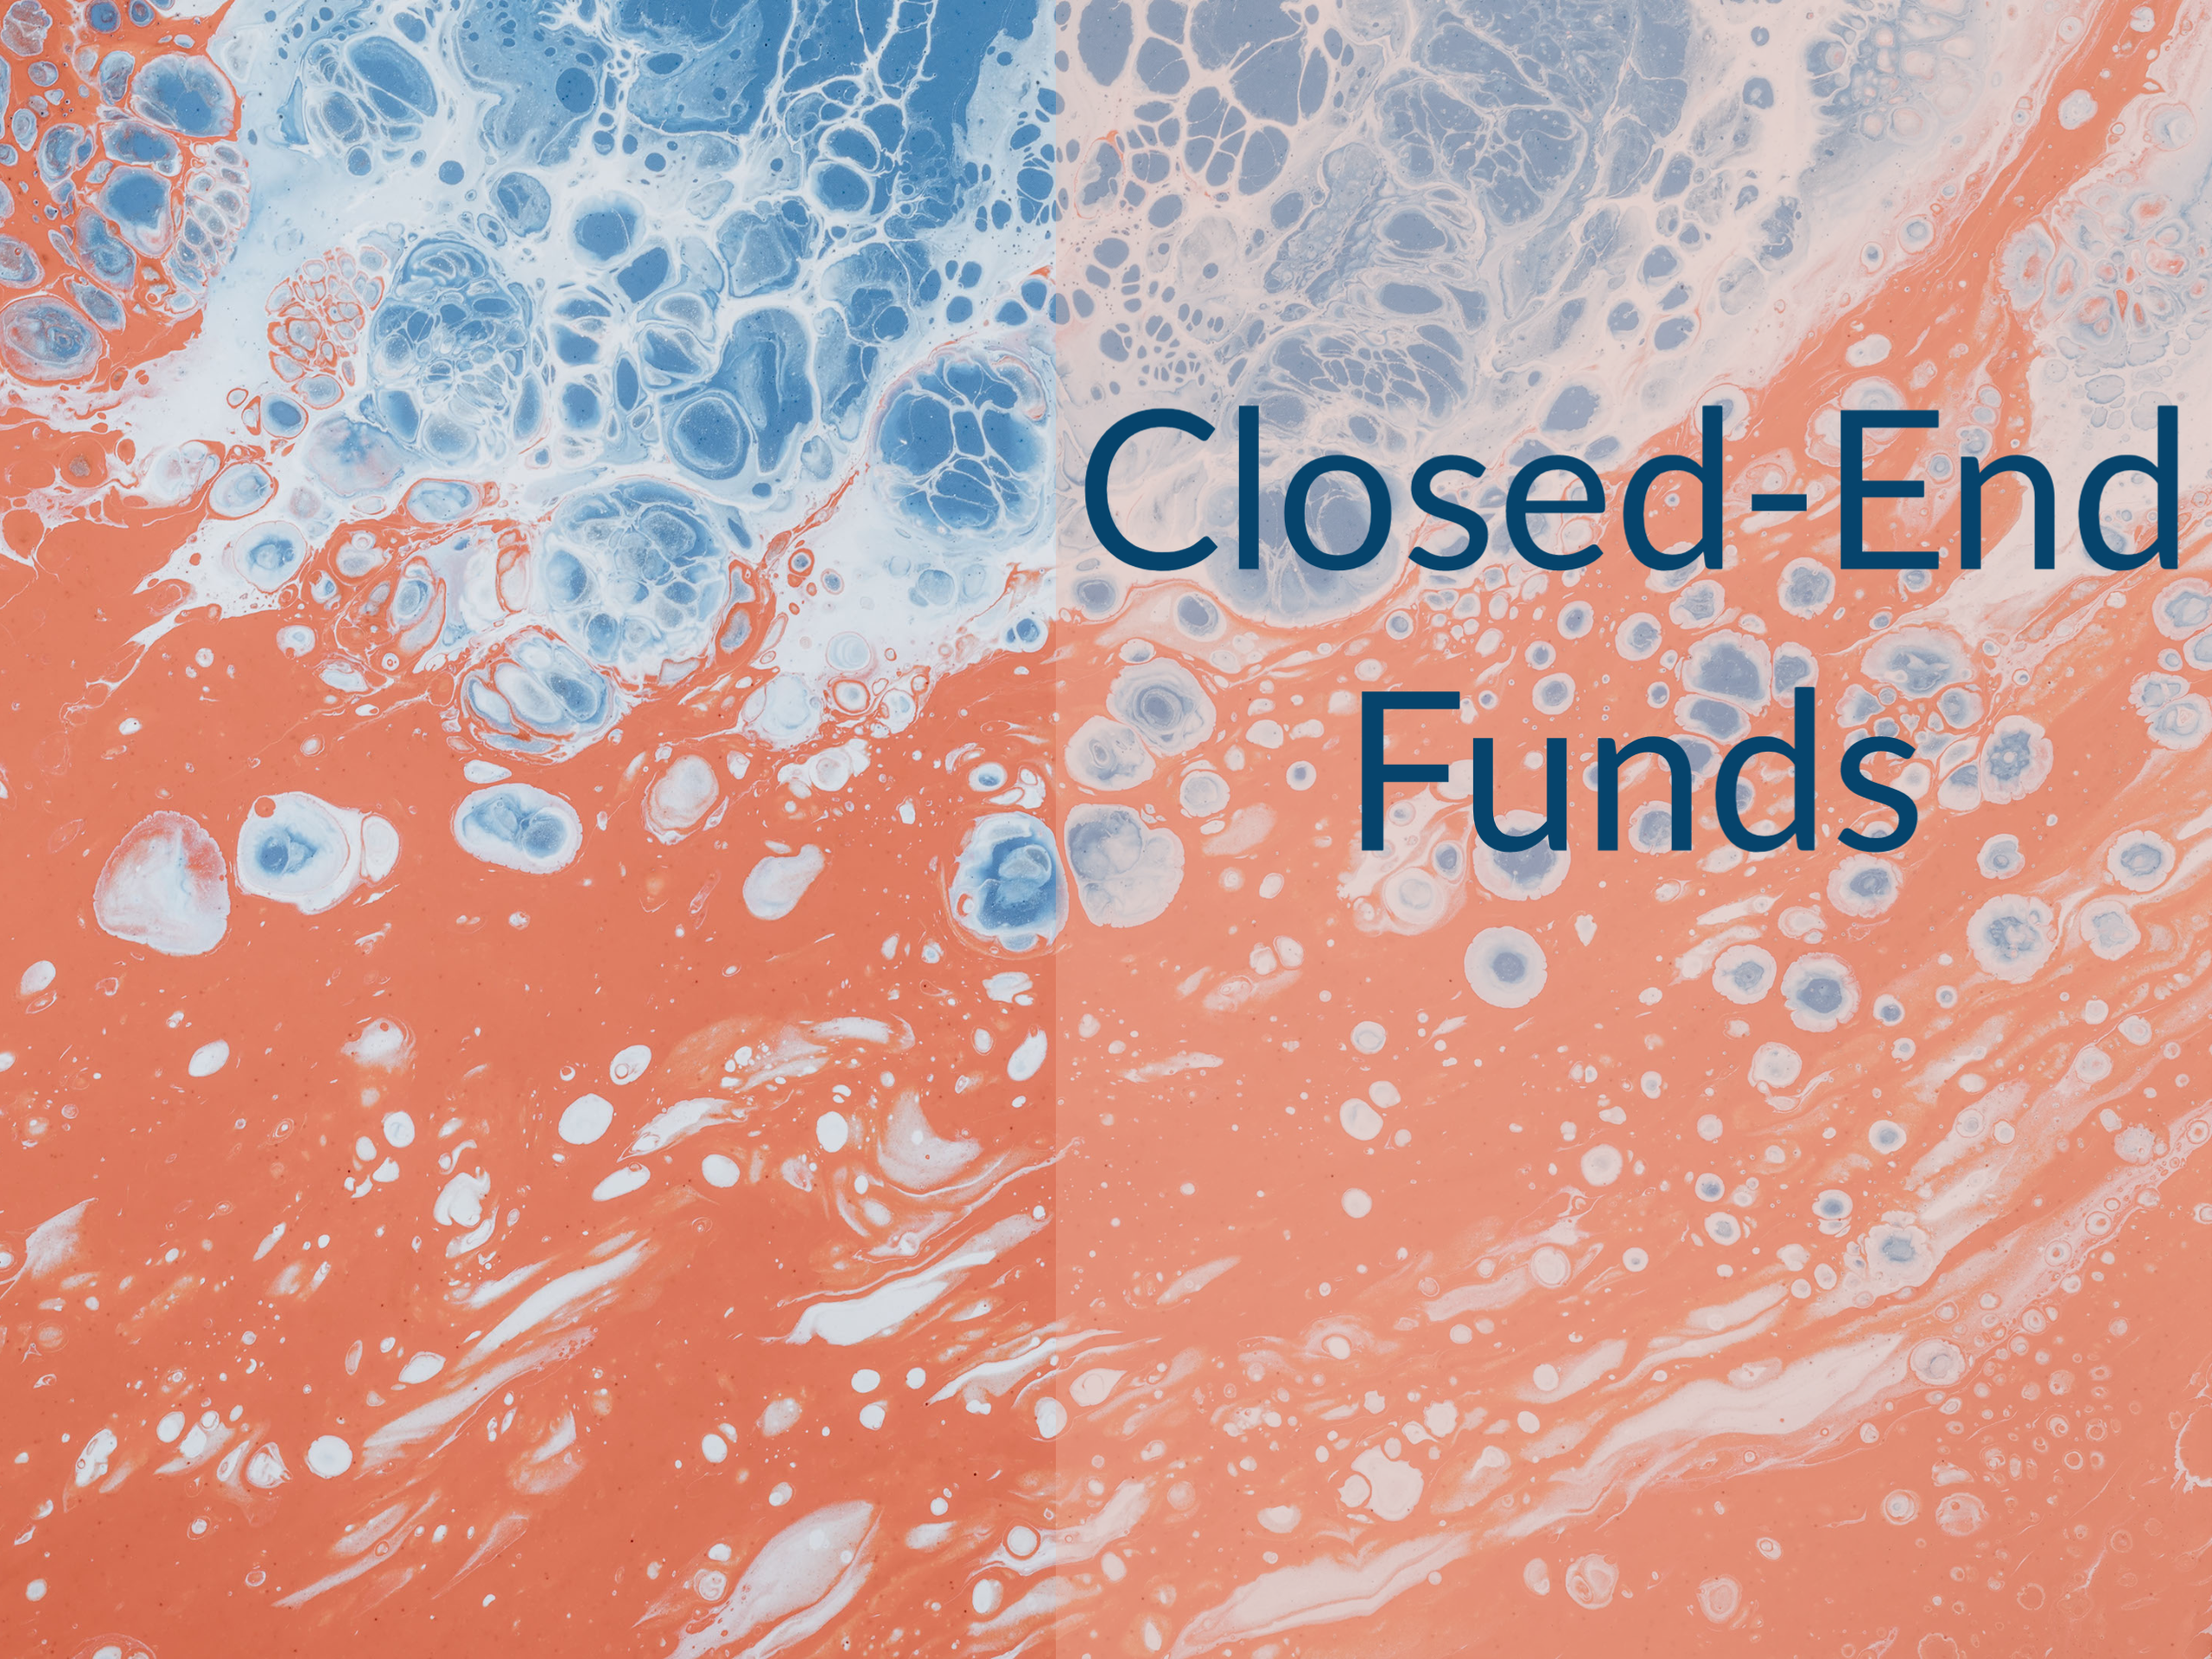 3 Closed-End Funds to Buy With Big Discounts